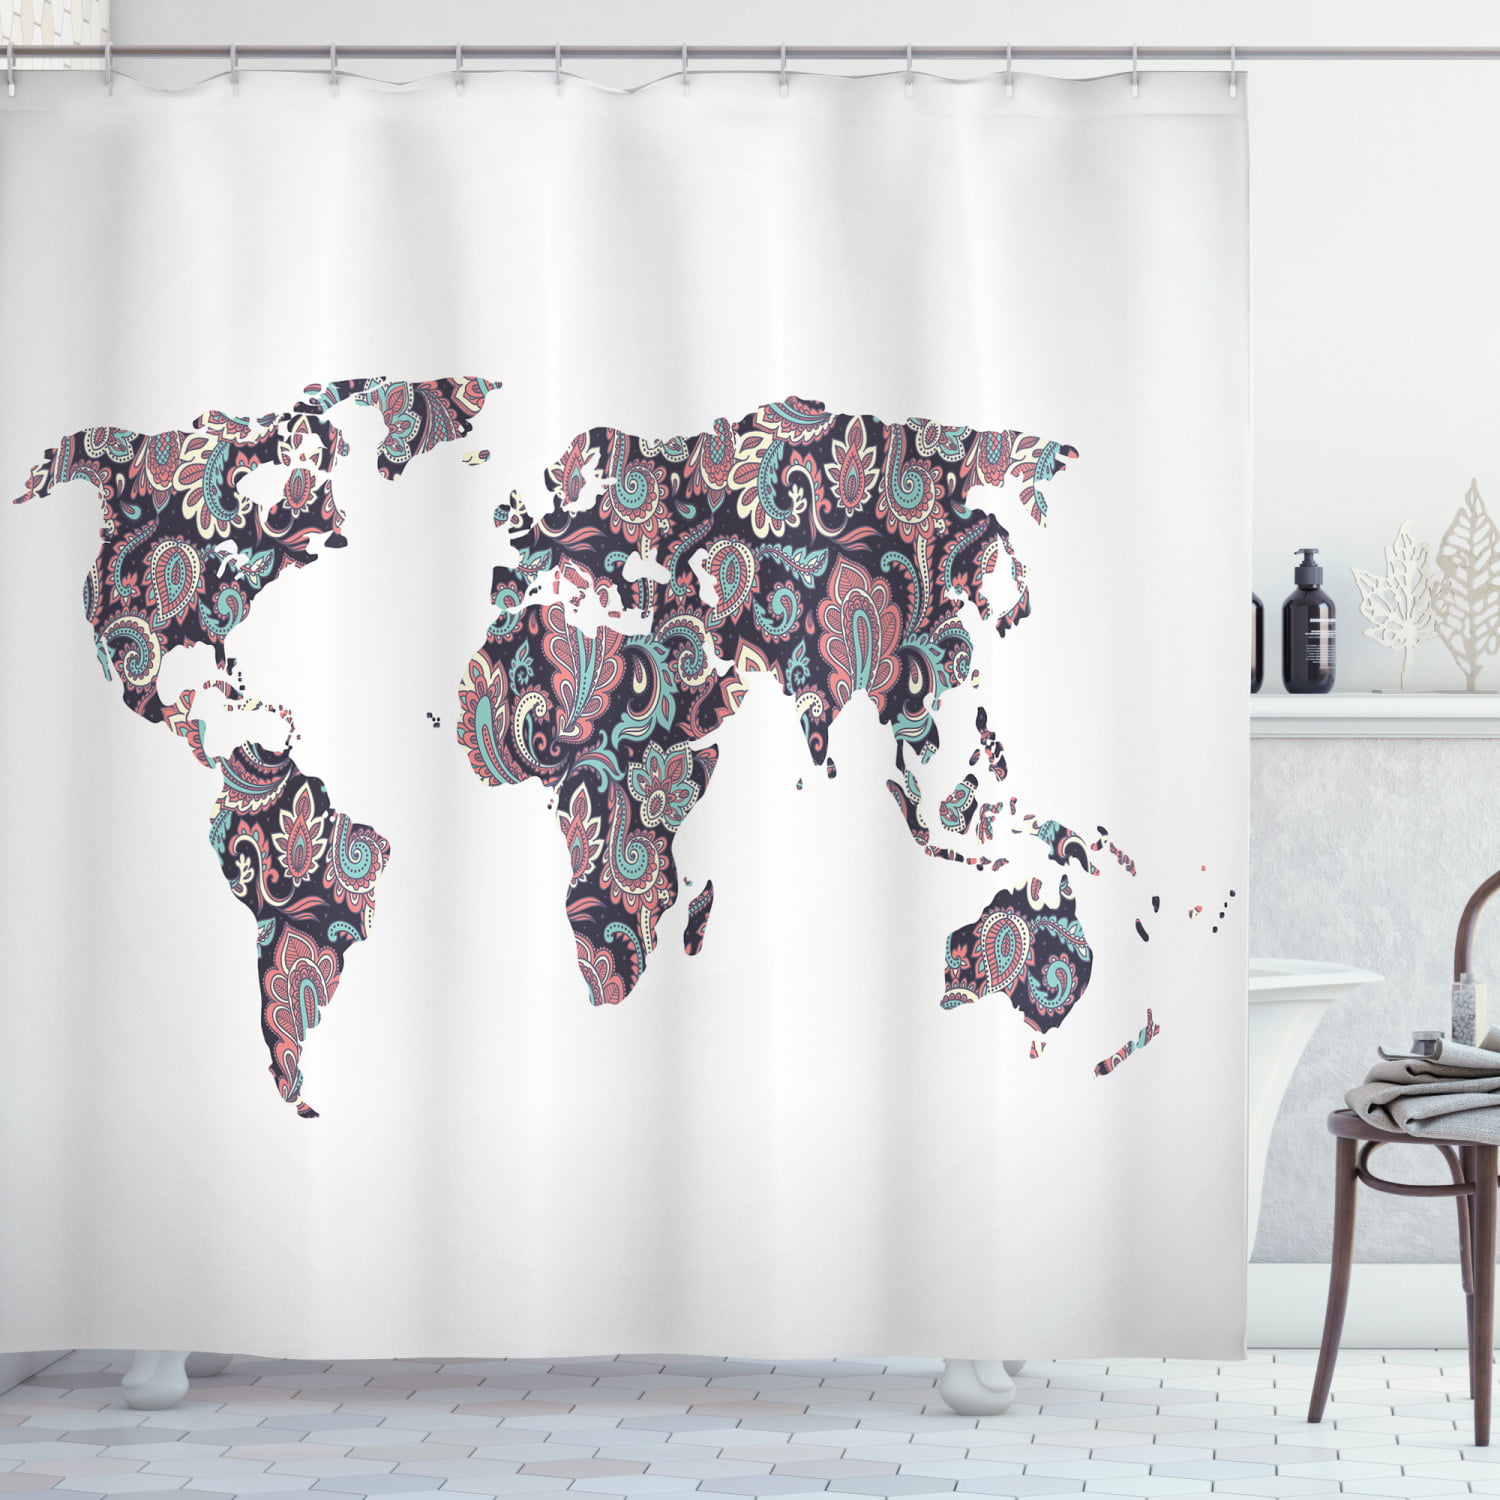 Map Pattern Shower Curtain Fabric Decor Set with Hooks 4 Sizes Ambesonne 